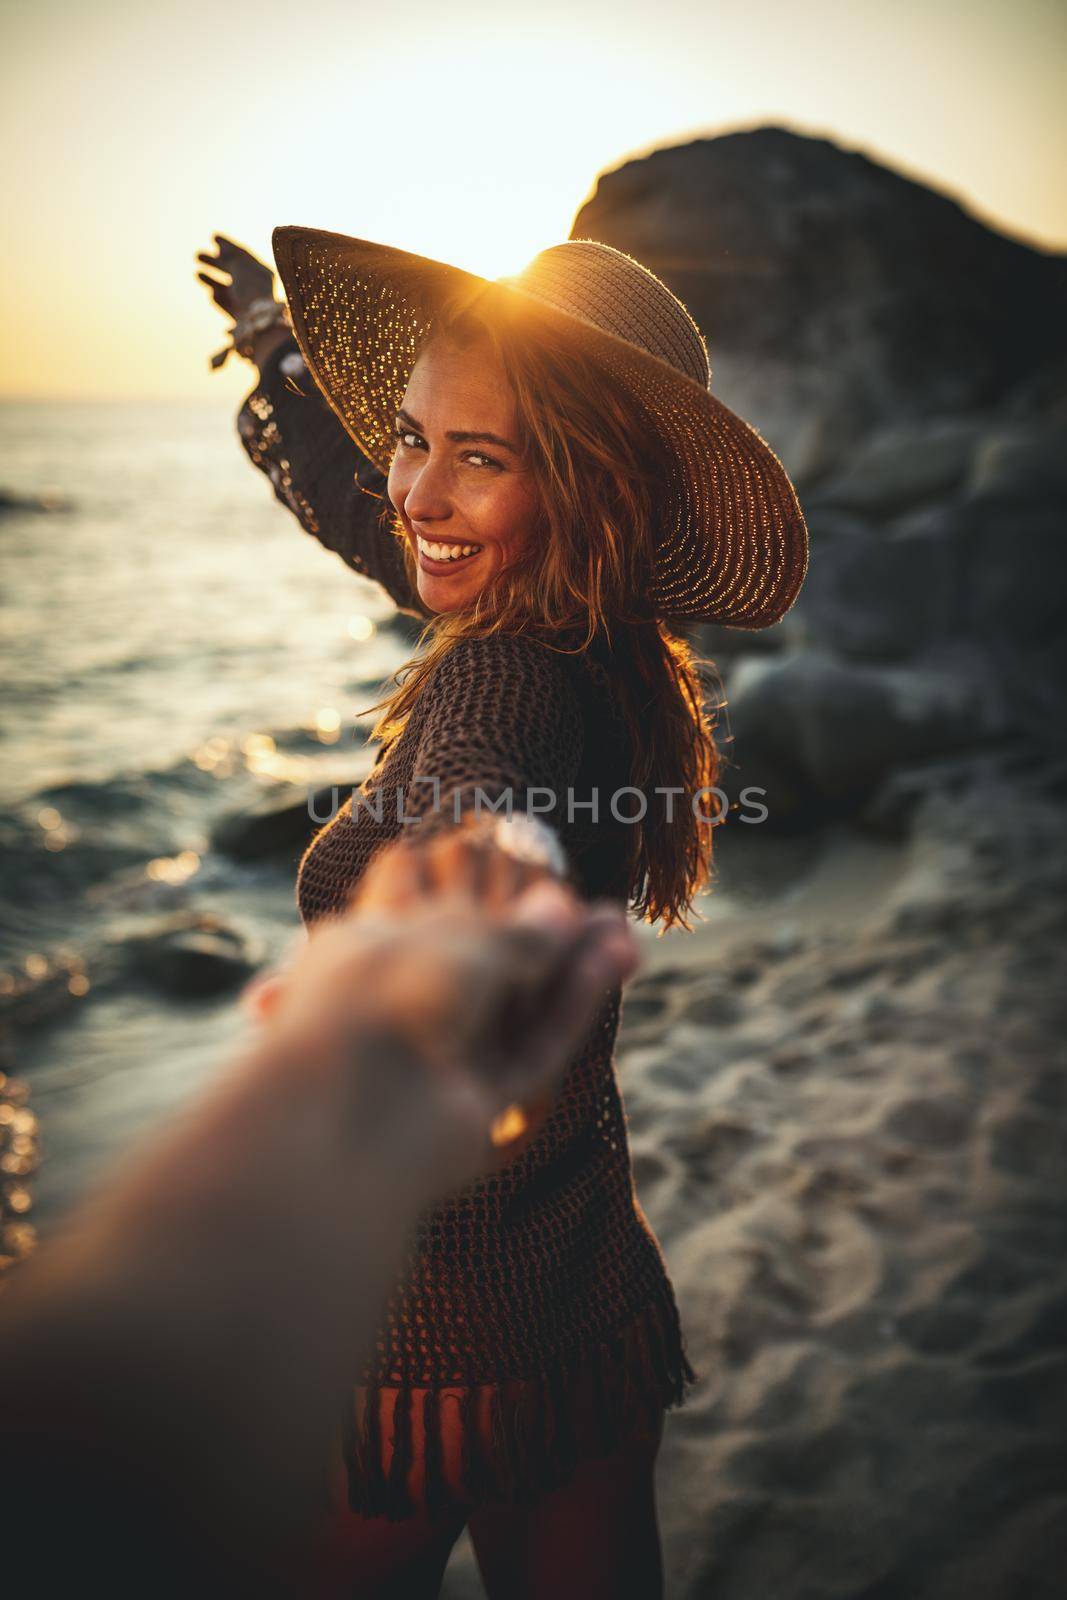 A beautiful young woman is having fun and relaxing on the beach at the sunset. She extends a hand to someone whose hand is seen.